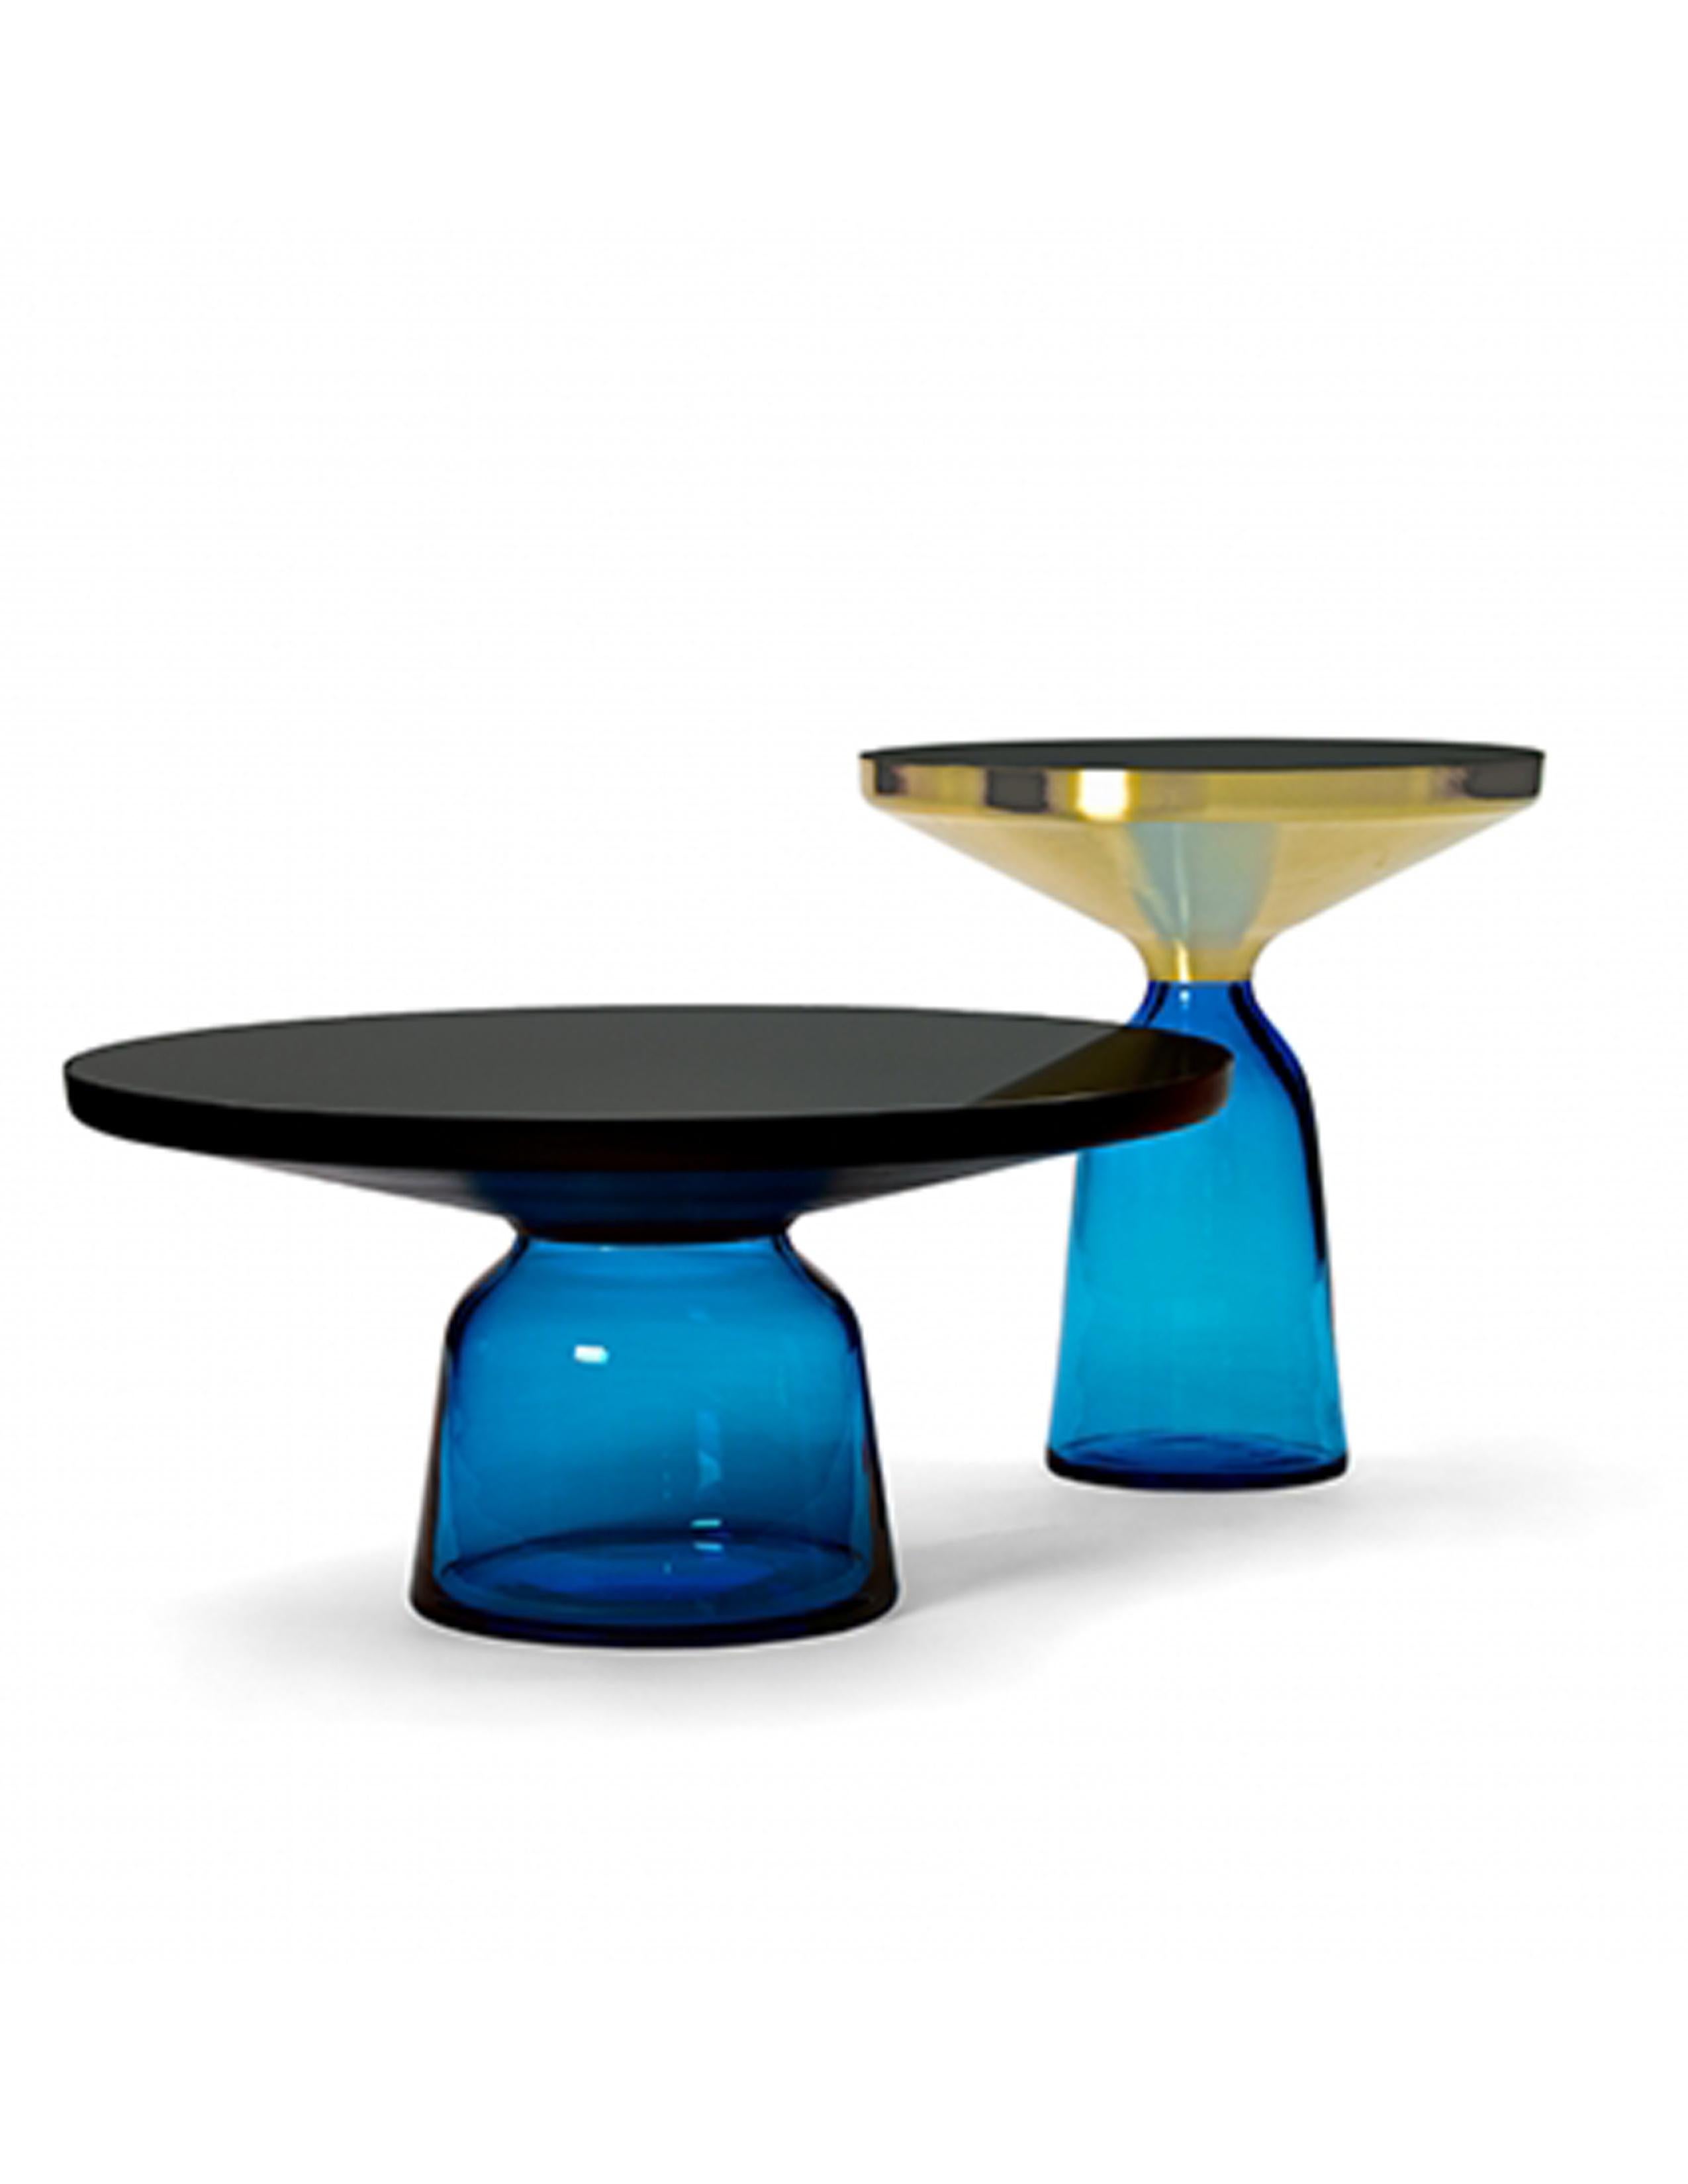 The bell table by Sebastian Herkner turns our perceptual habits on their head, using the lightweight, fragile material of glass as base for a metal top that seems to float above it. Hand blown in the traditional manner using a wooden mold, the